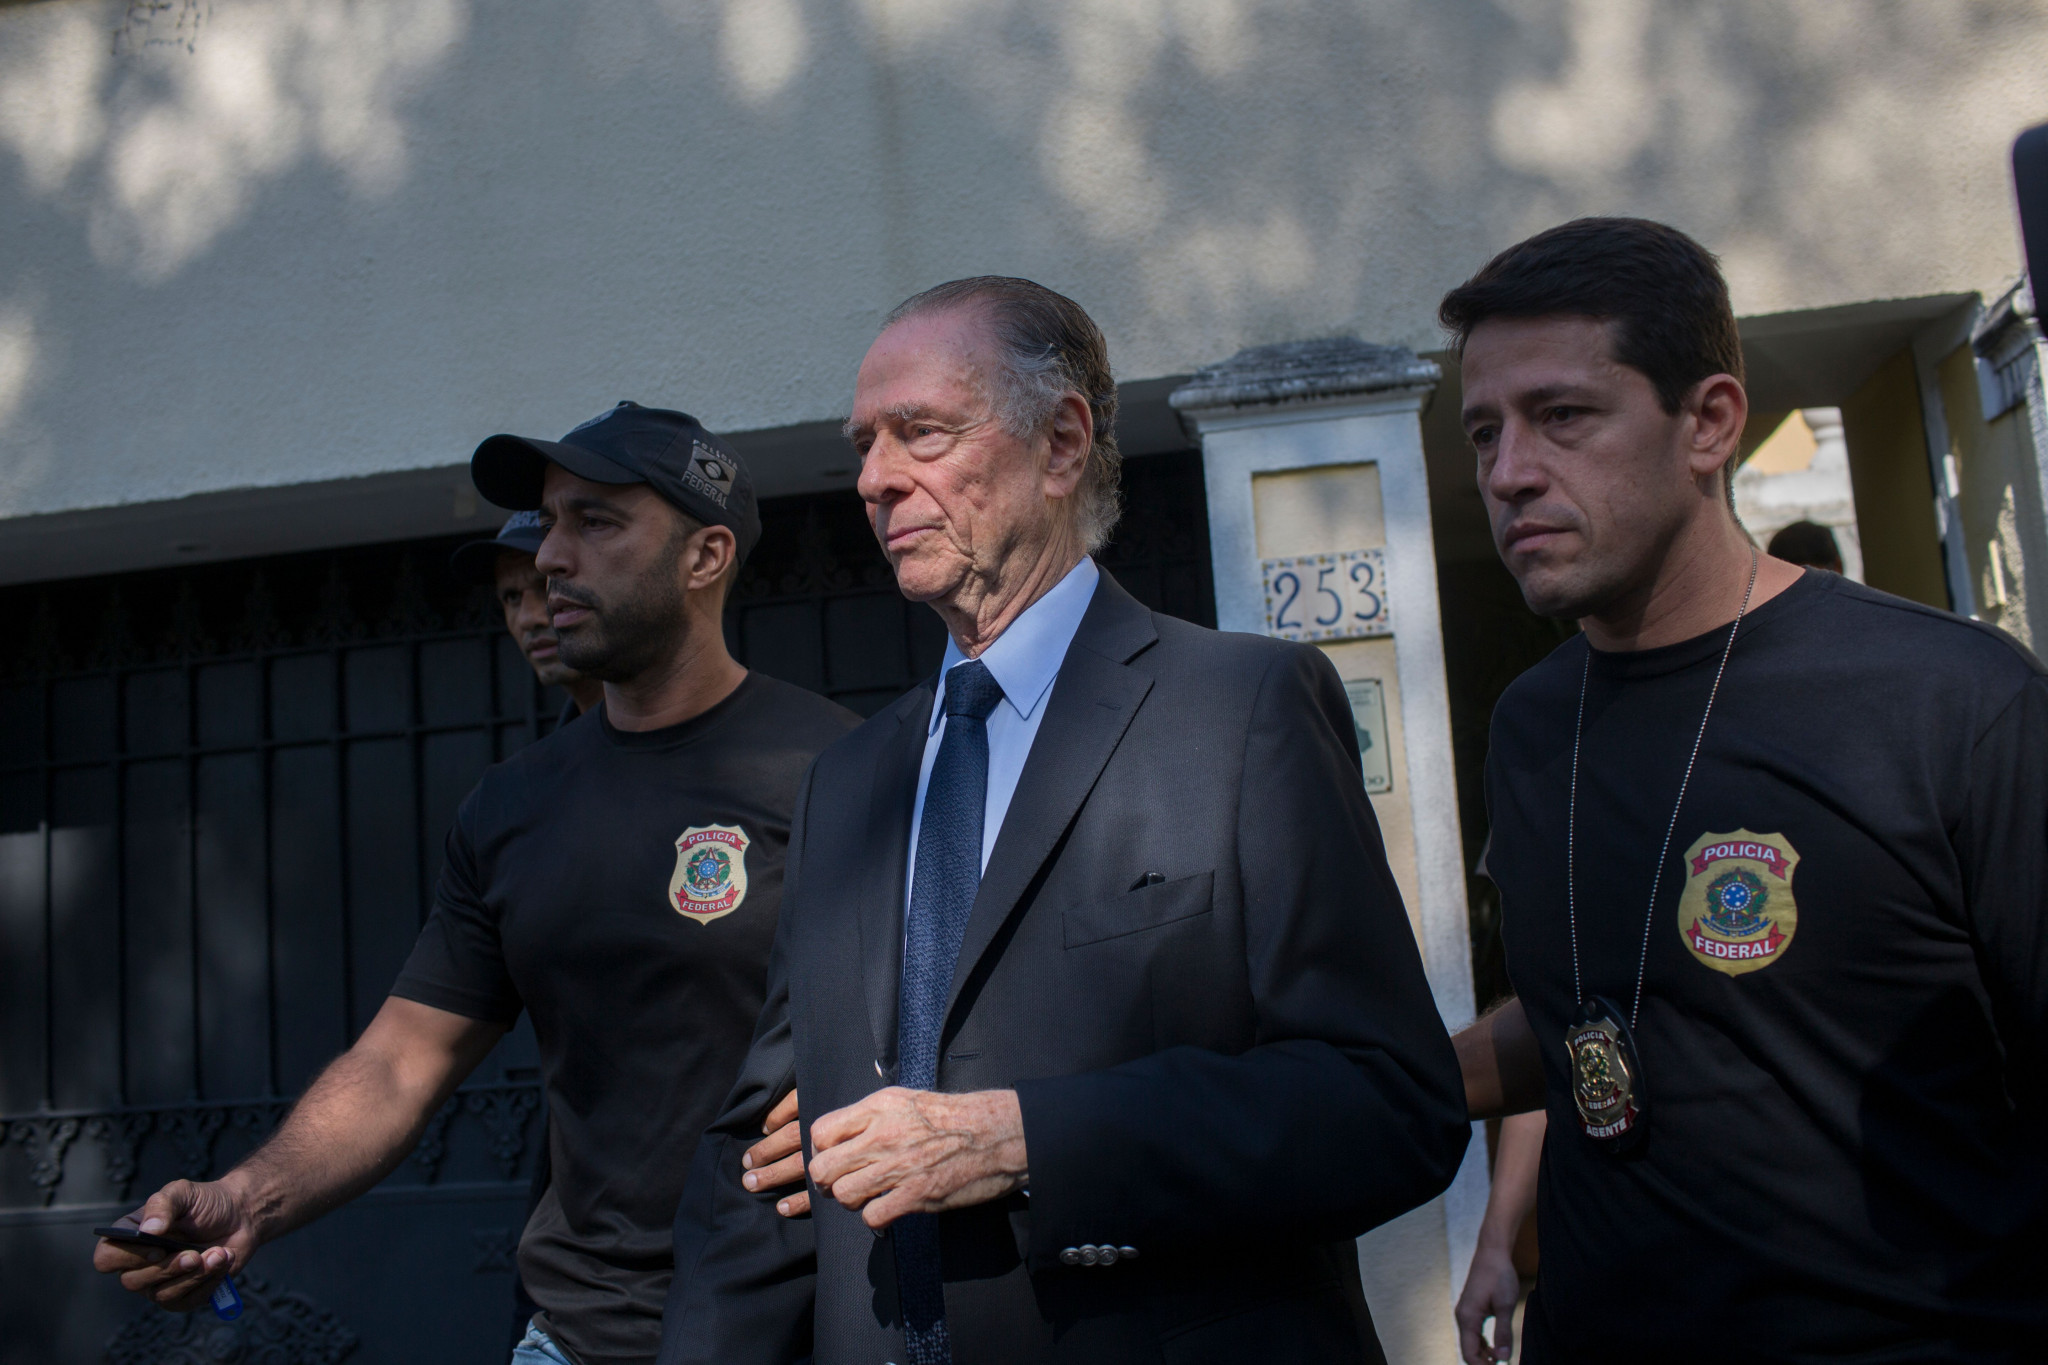 Nuzman appears in court to deny involvement in Rio 2016 vote-buying scheme